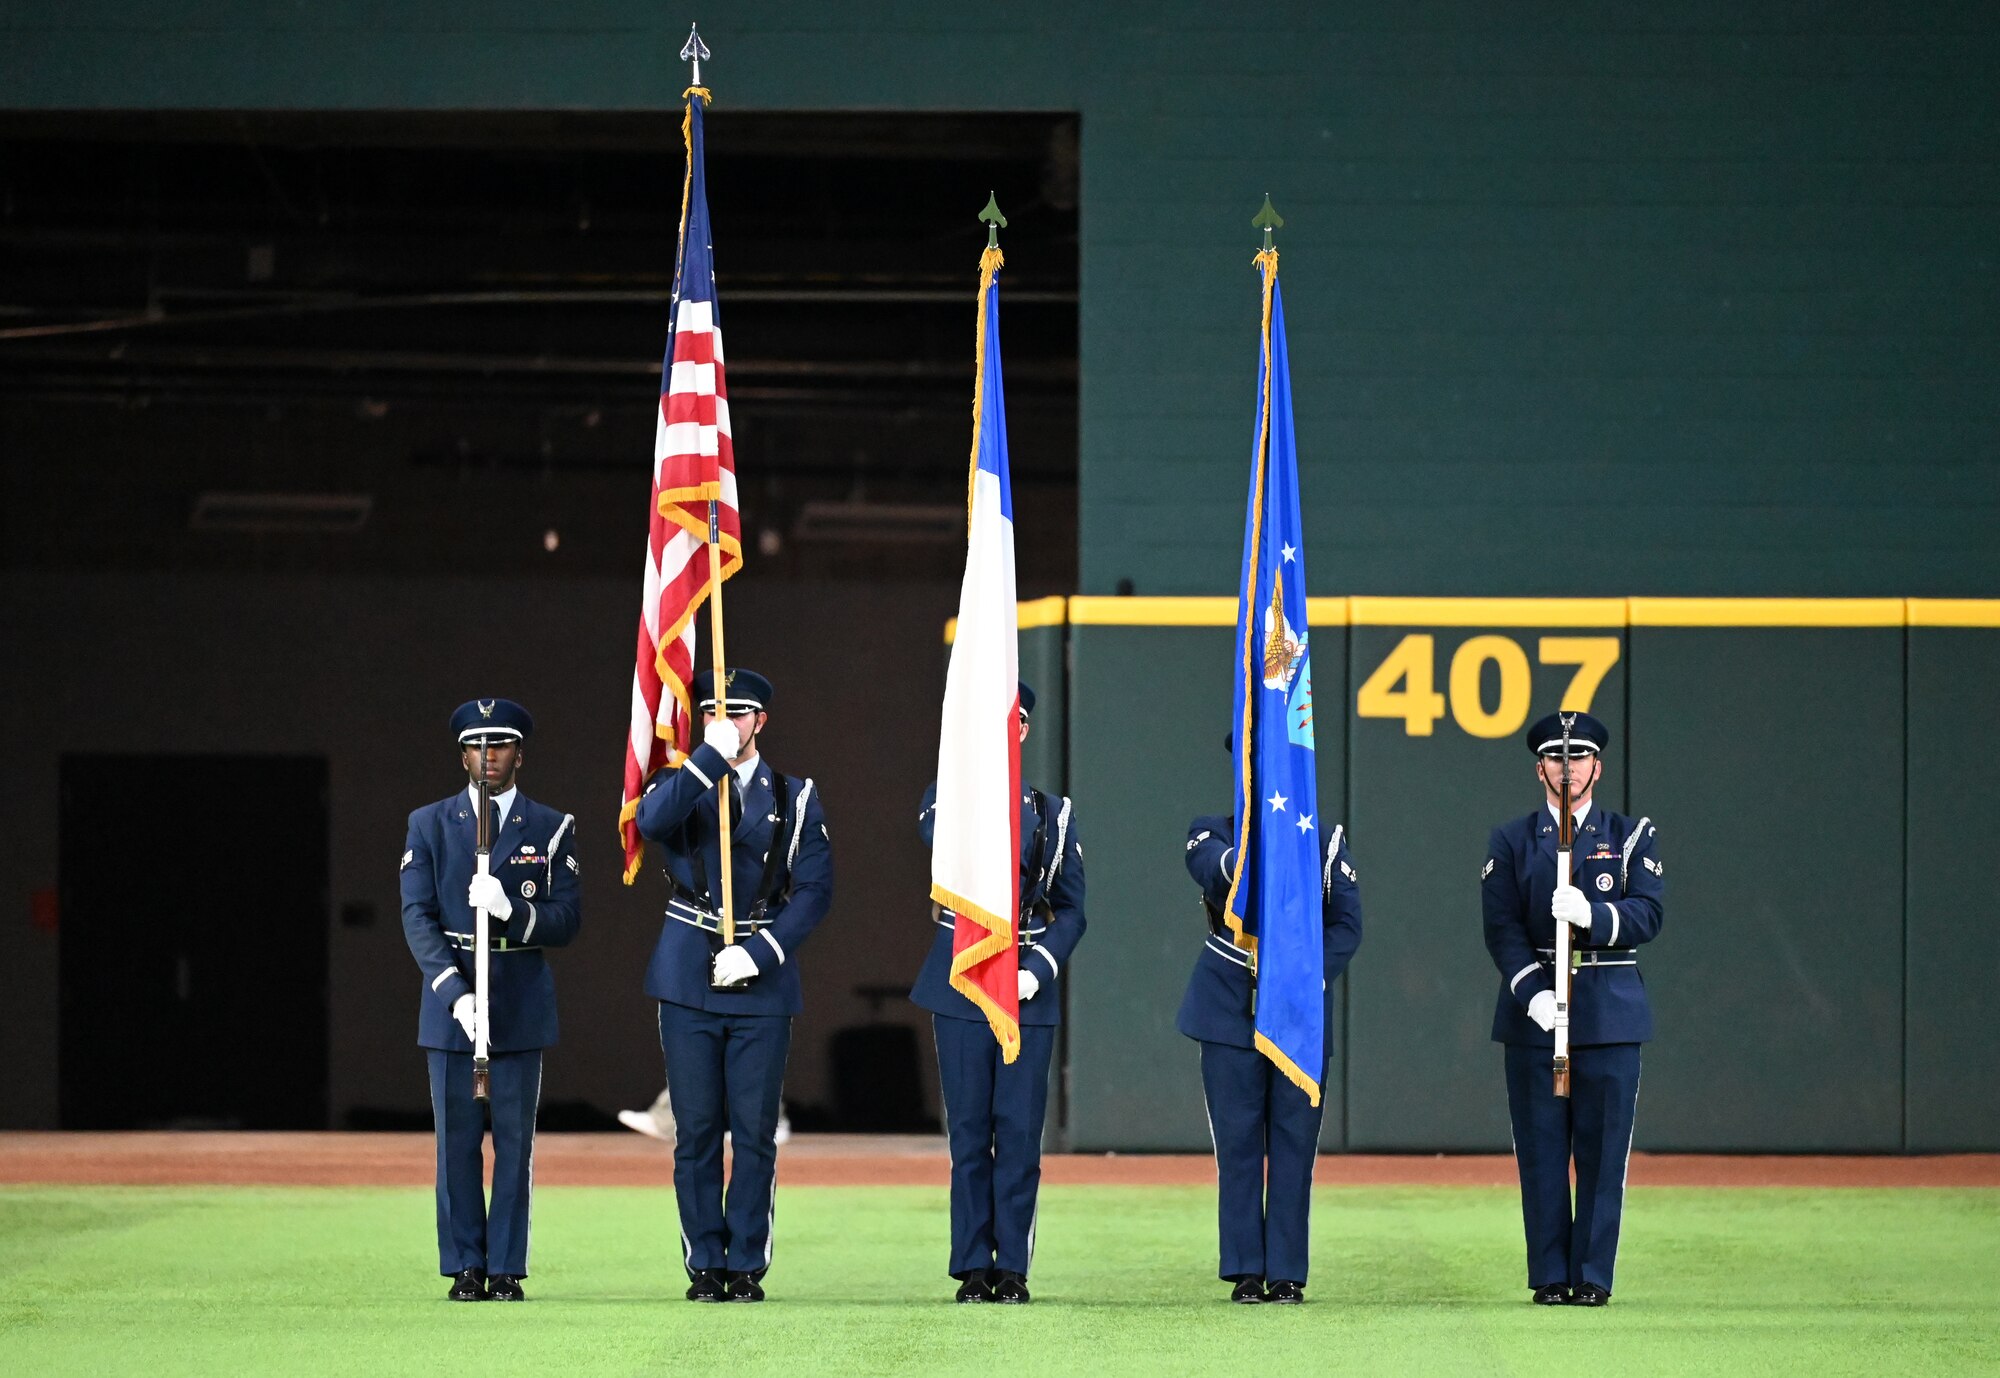 The Dyess Honor Guard presents the colors during the national anthem at the World Series opening game at Globe Life Field in Arlington, Texas, Oct. 27, 2023. The Dyess Honor Guard provides services including funeral honors and presenting the colors at ceremonies, parades and sporting events. (U.S. Air Force photo by Staff Sgt. Holly Cook)